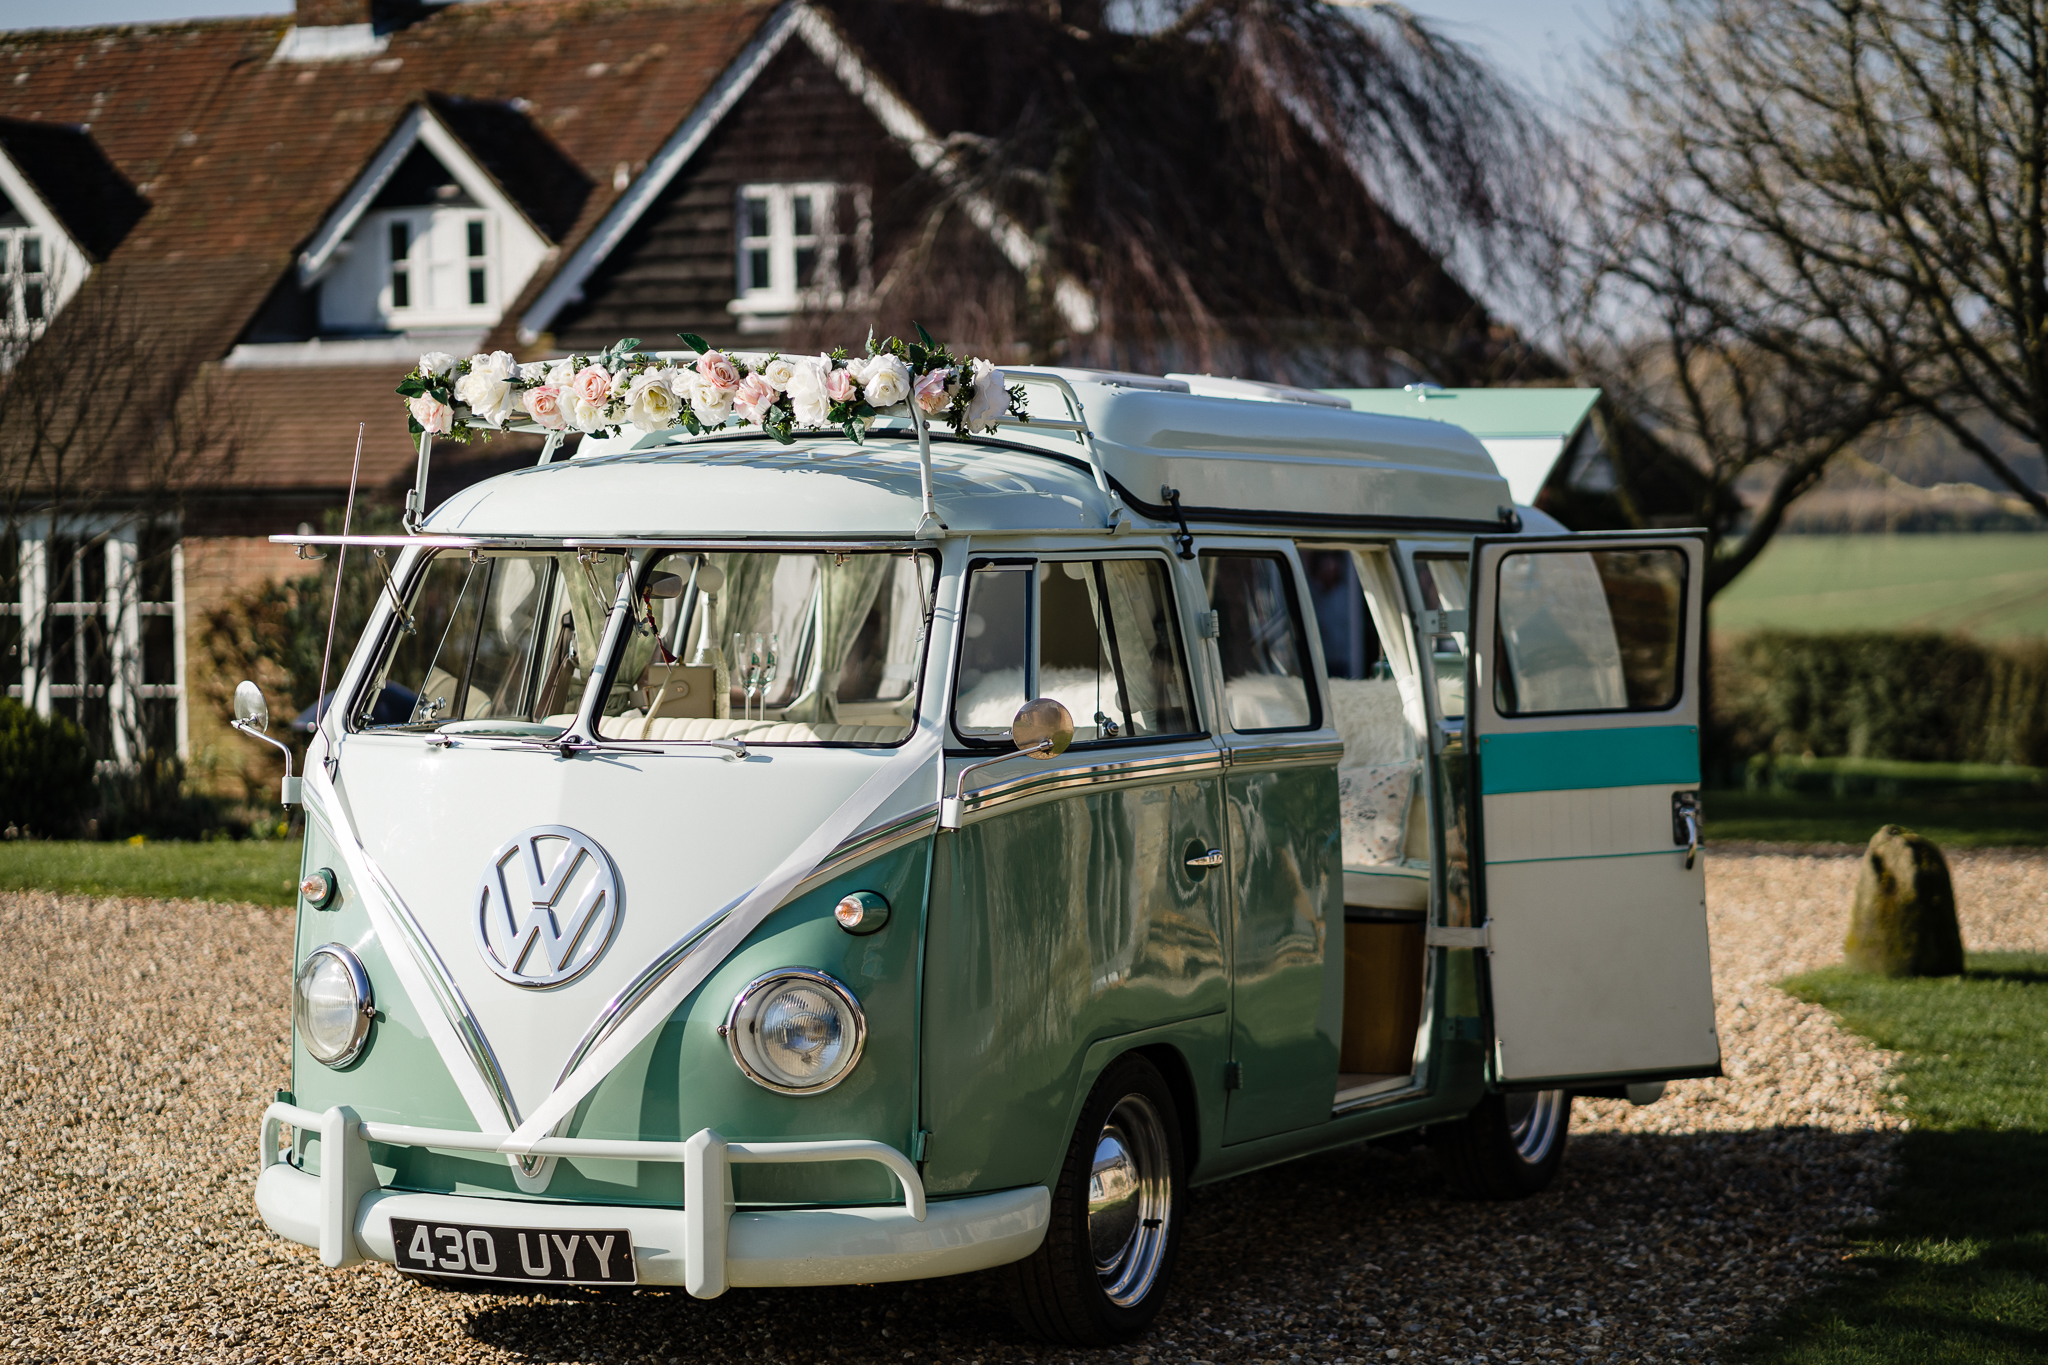 Retro Classic Volkswagen Splitscreen Campervan in two tone White and Pastel Green decorated with White Ribbons on front Bonnet and Wedding Flowers on top